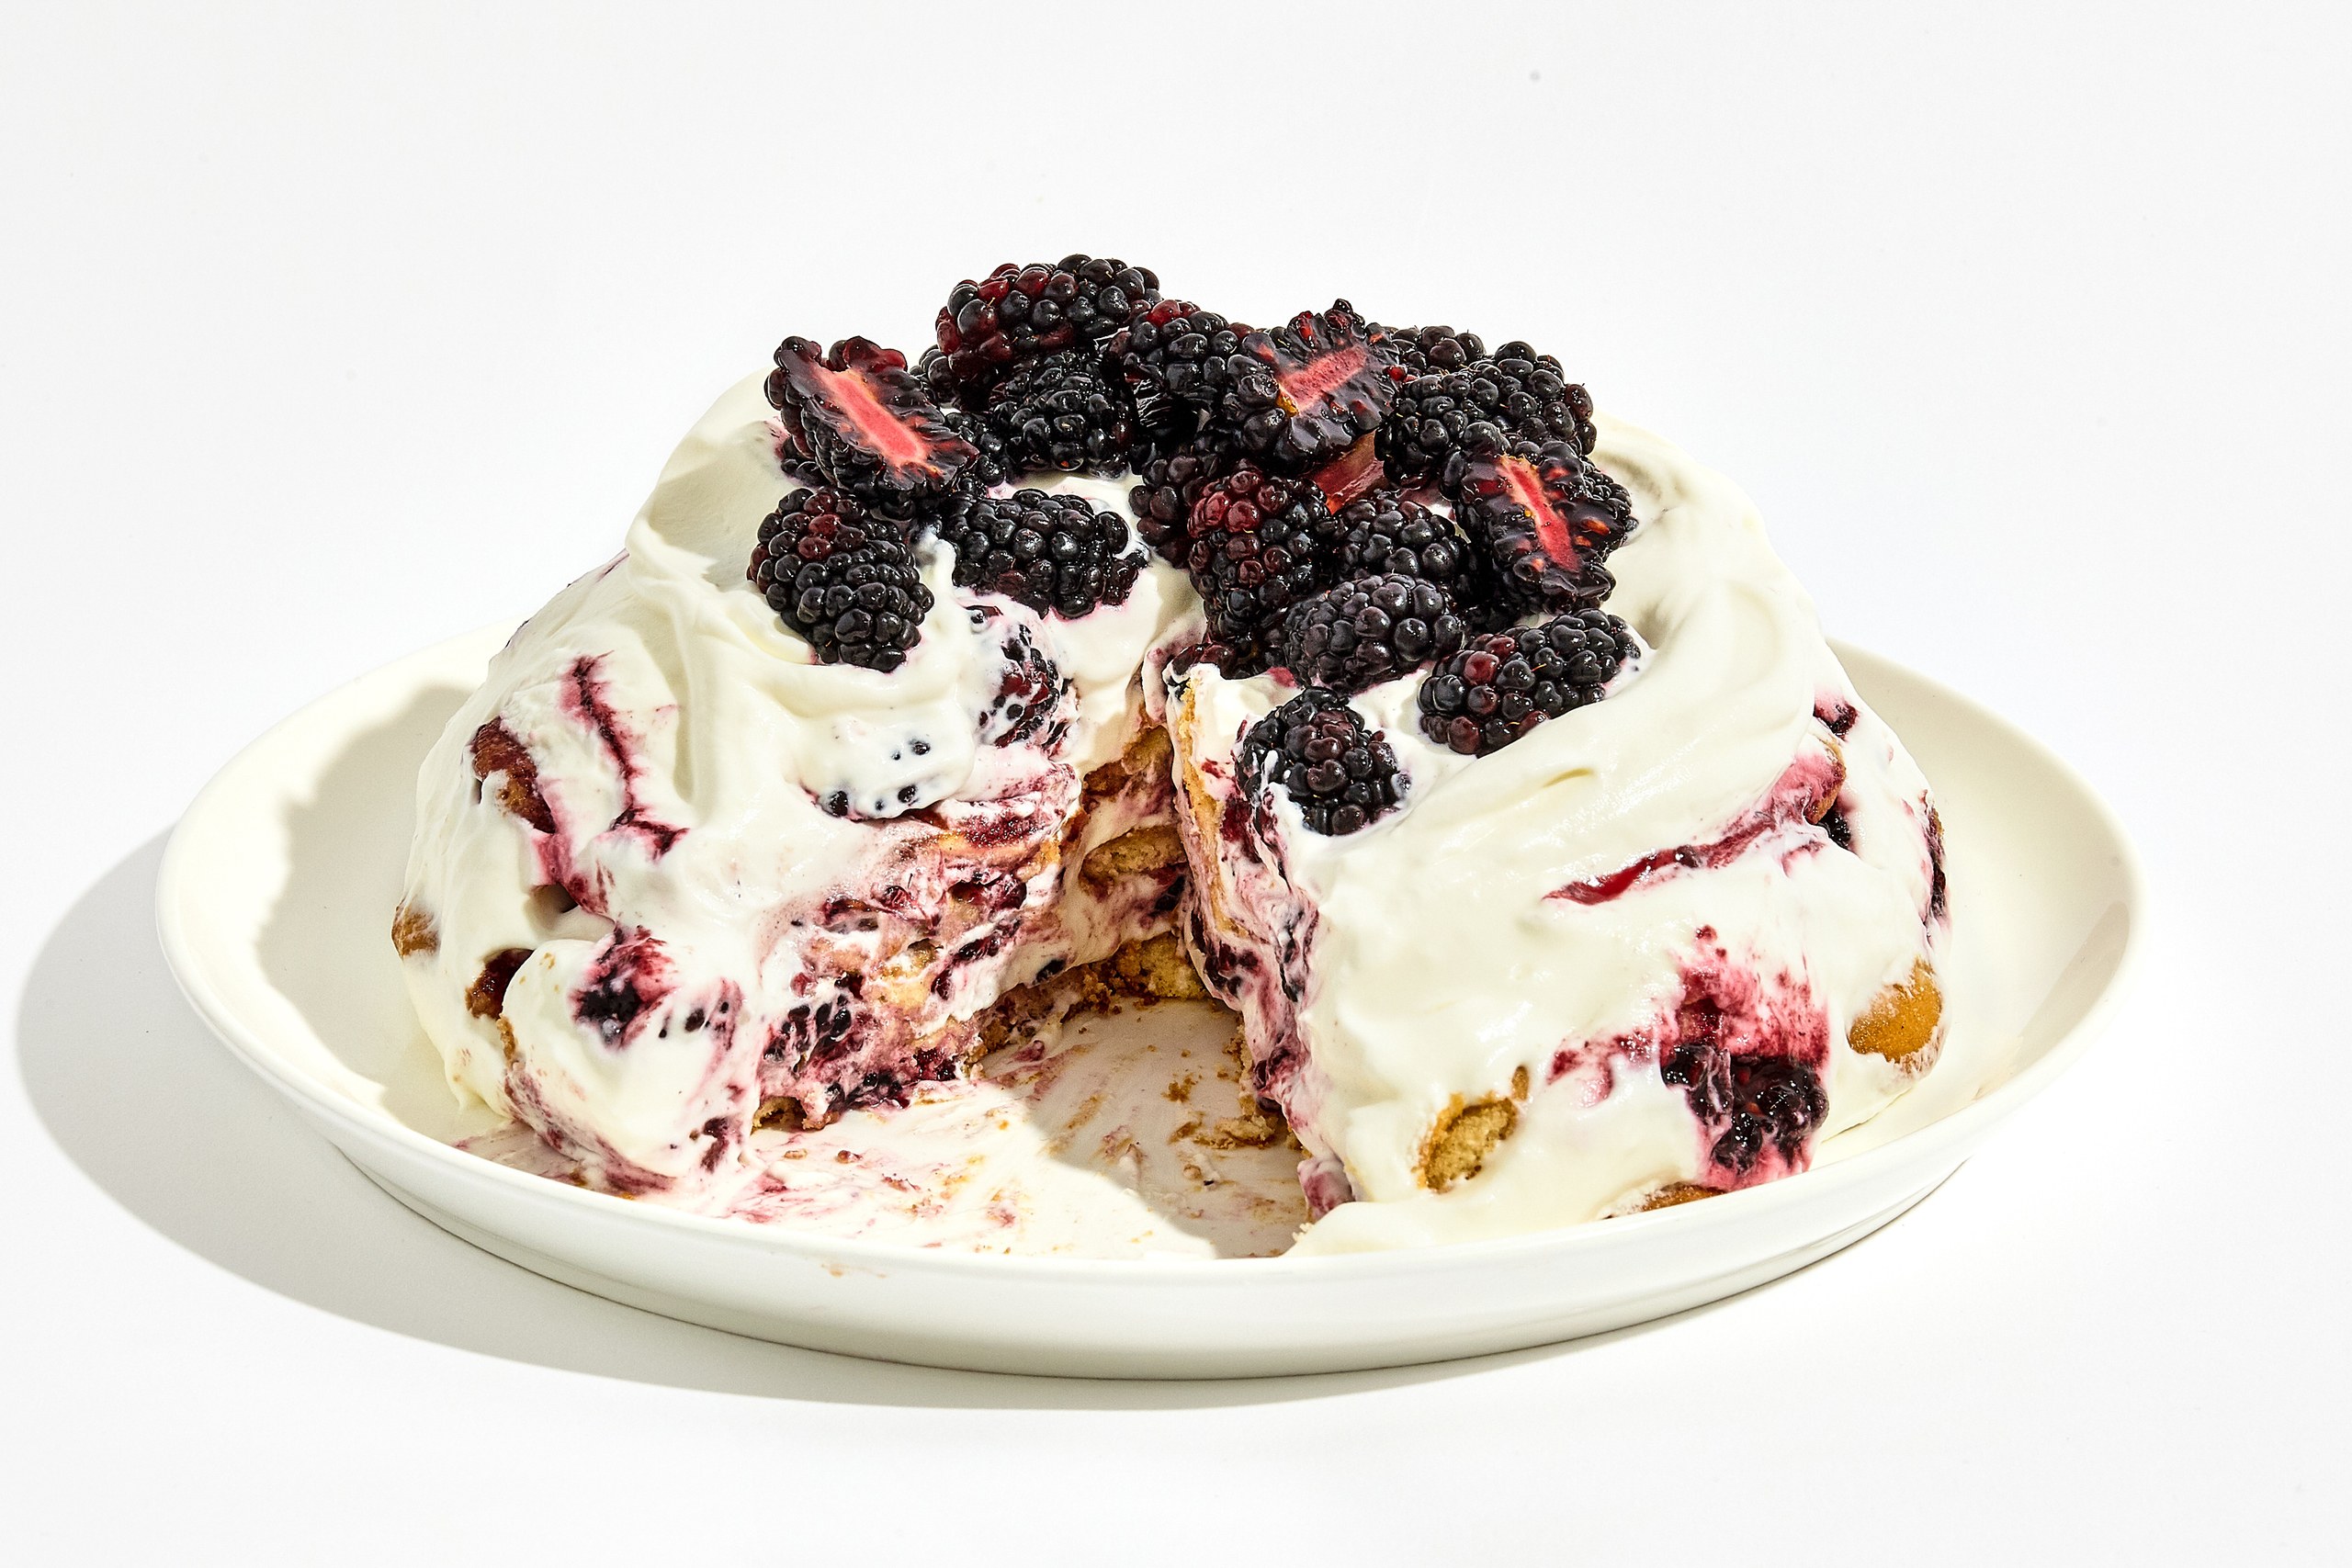 Blackberry icebox cake on a plate topped with fresh blackberries